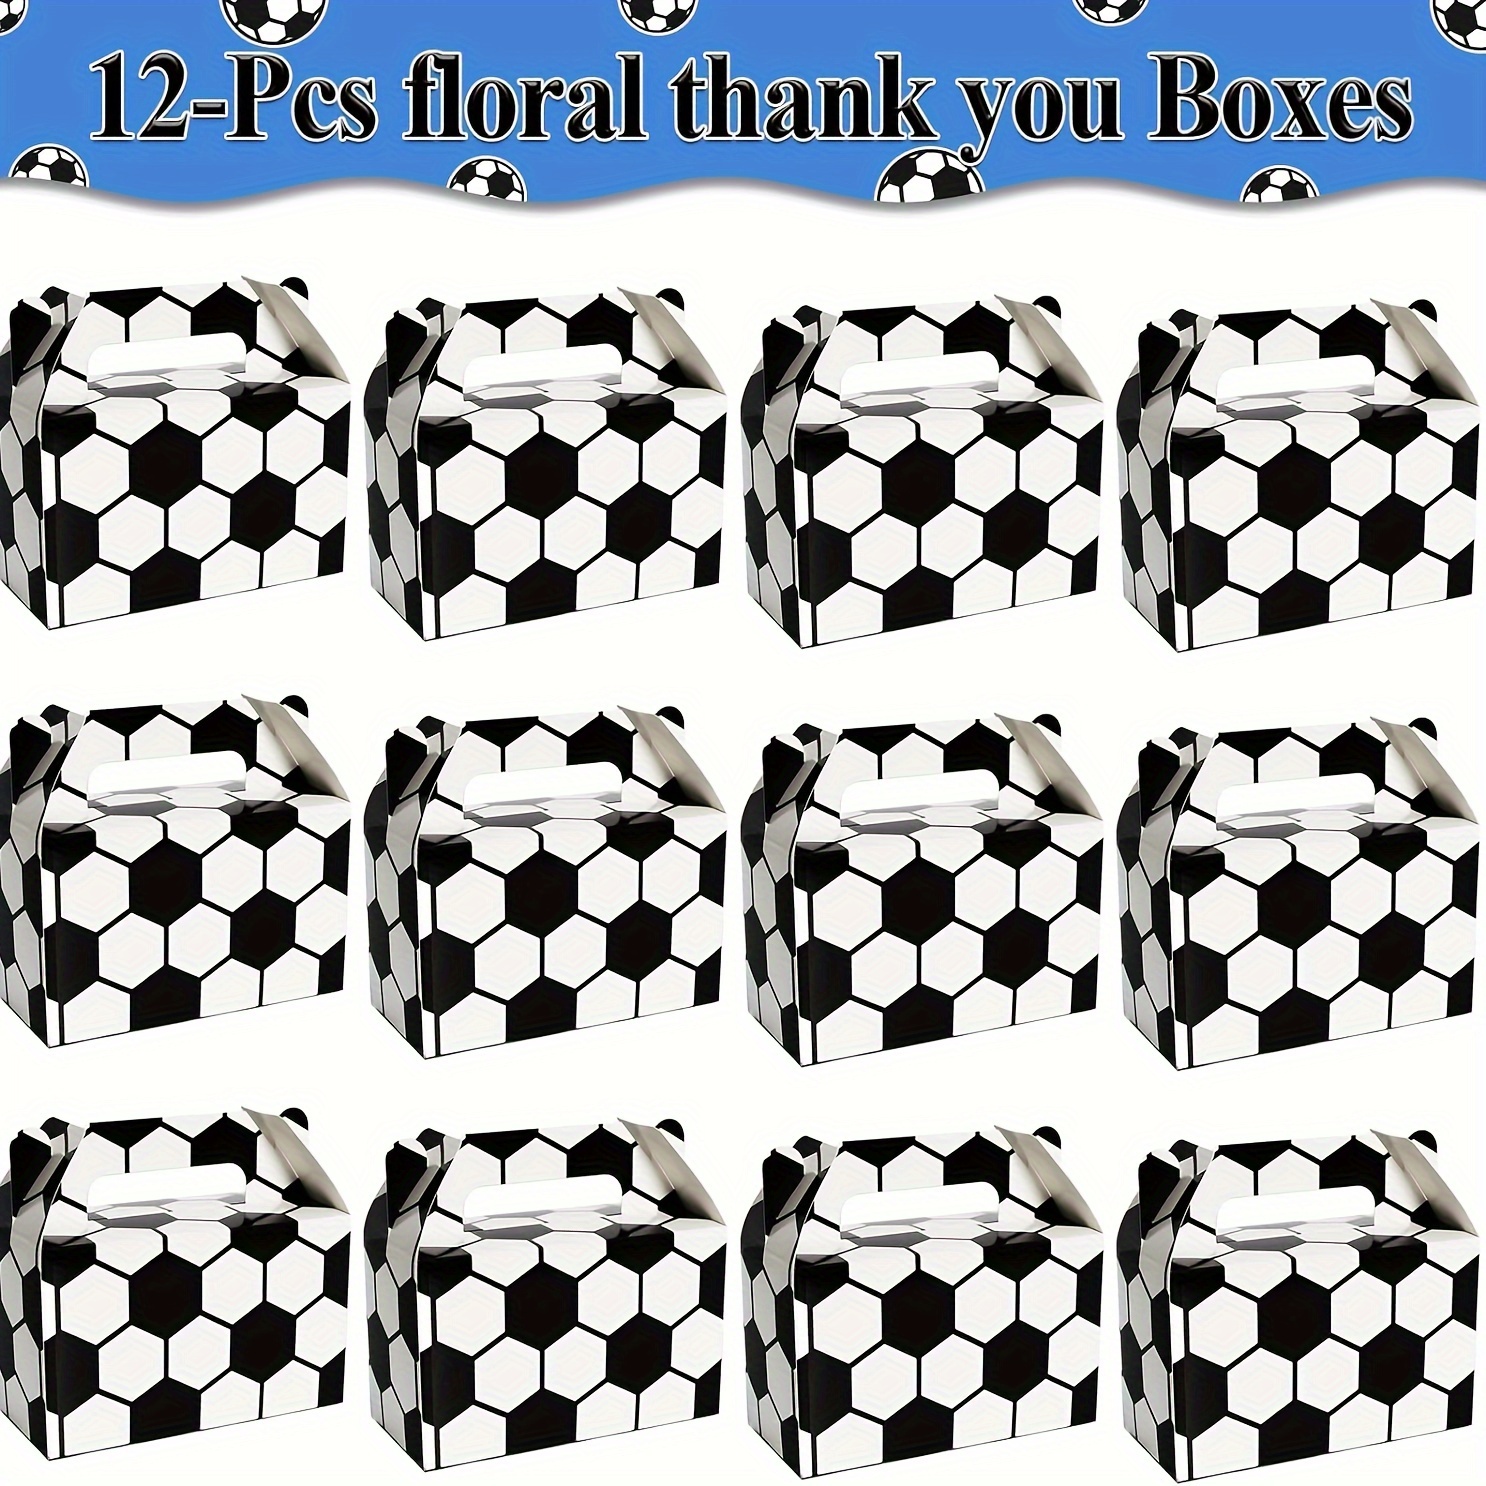 6 12 16 24pcs soccer treat boxes sports themed party favors happy birthday football bags soccer team candy goodies valentines day gift boxes forshower party decorations supplies